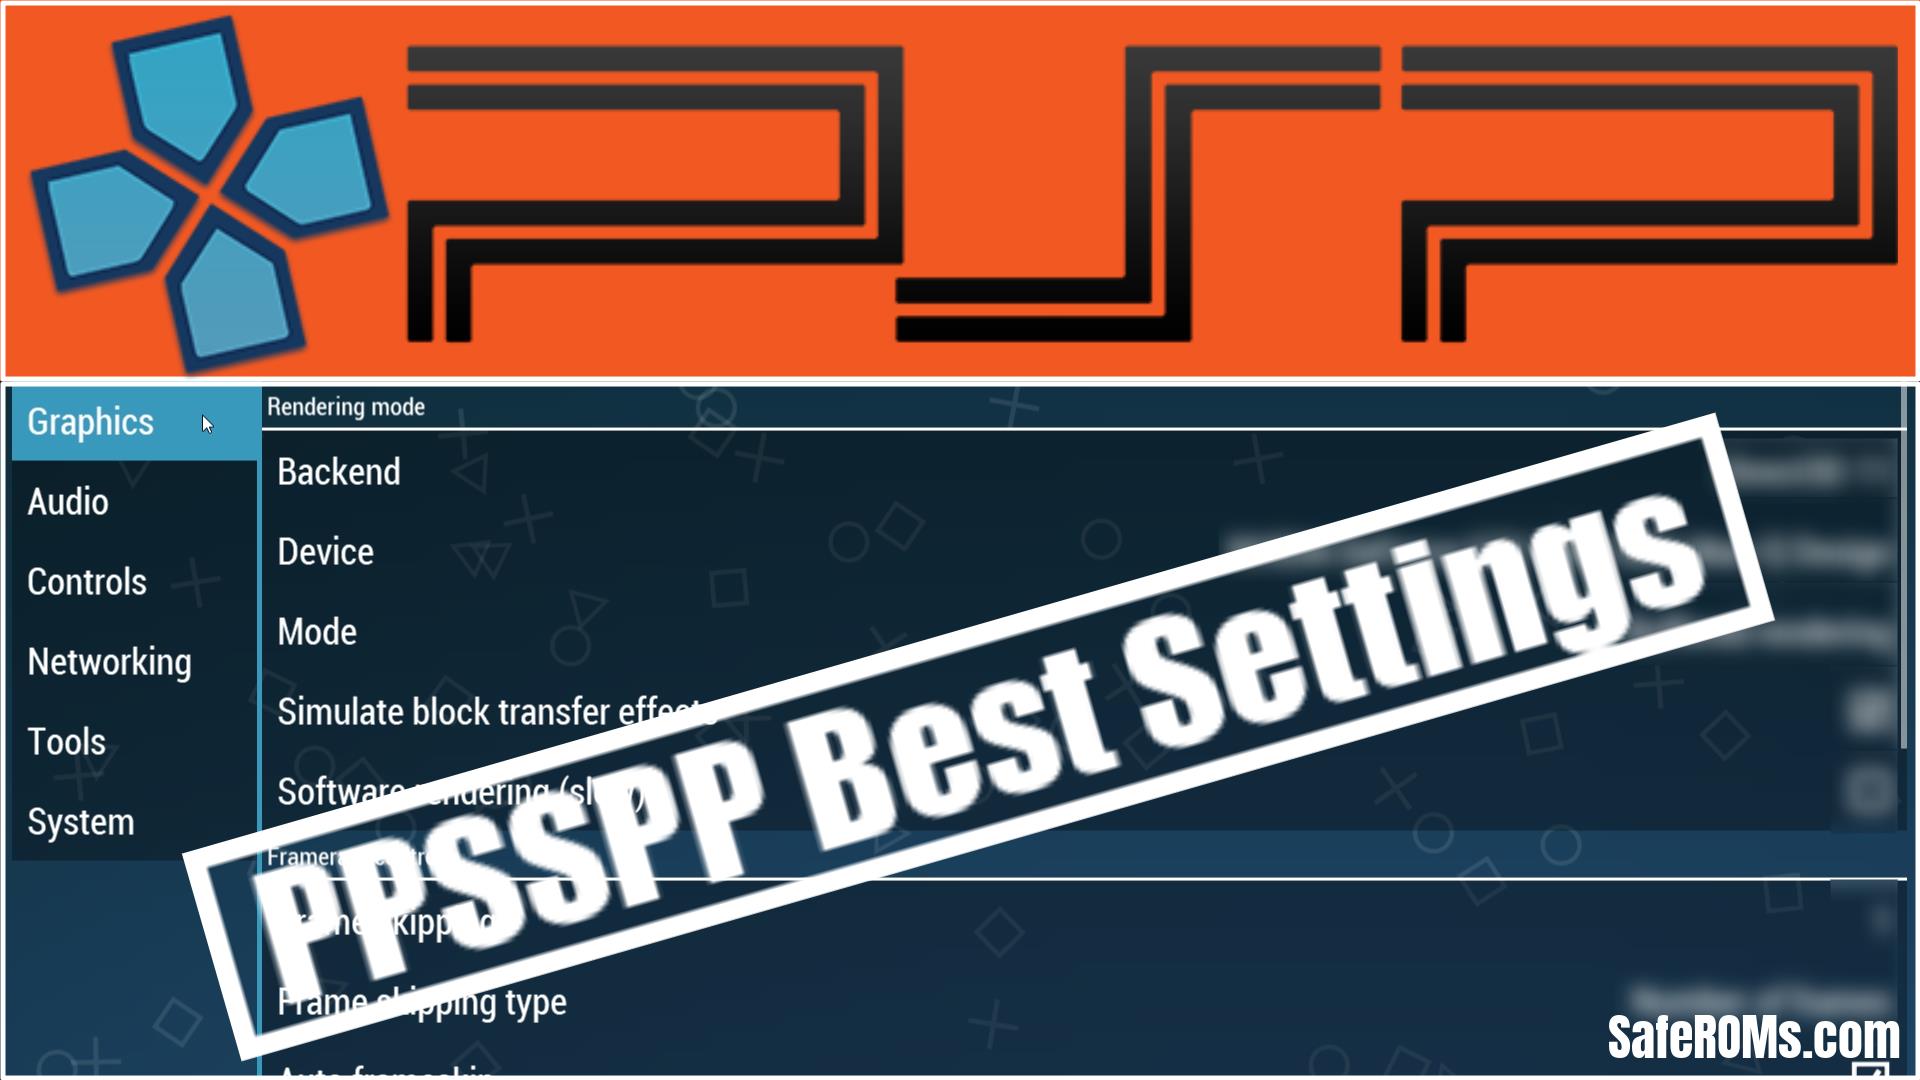 PPSSPP Best Settings PC